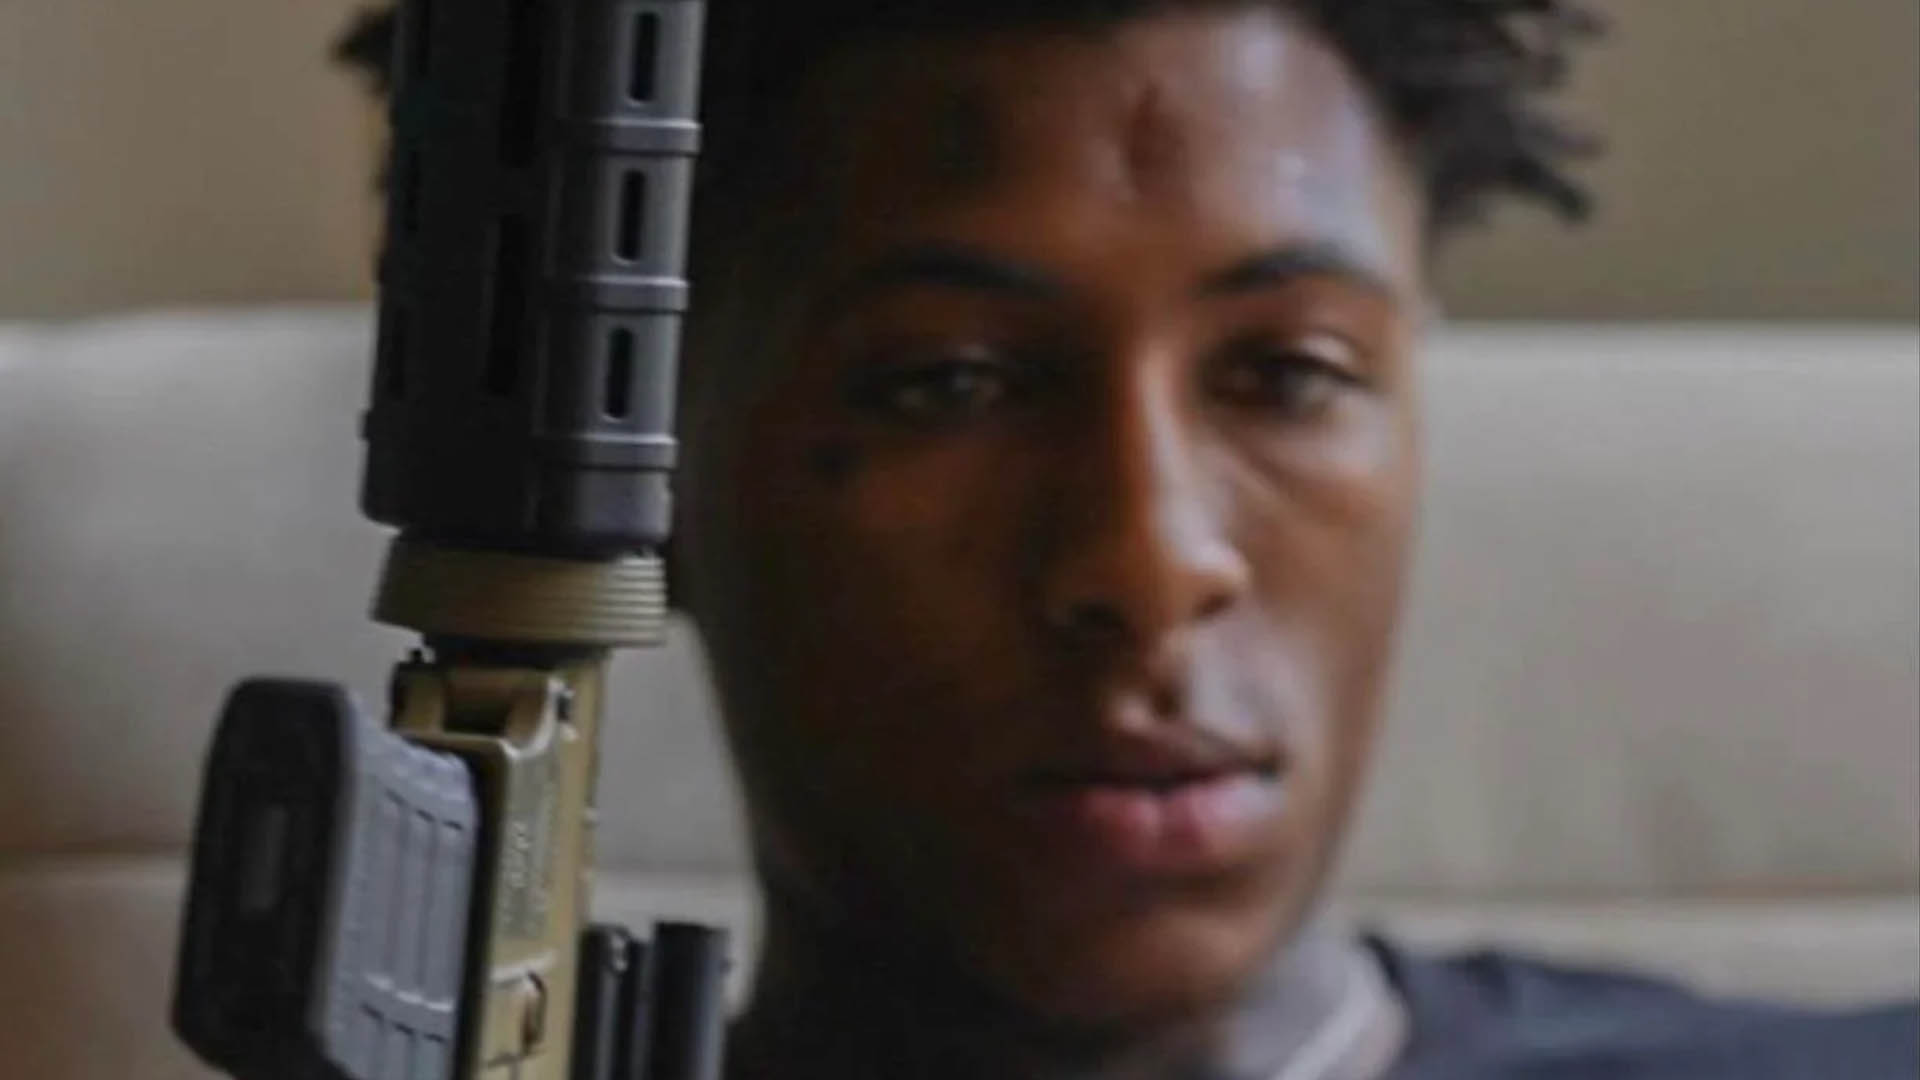 NBA Youngboy, the rapper, holding a gun in a contemplative pose.